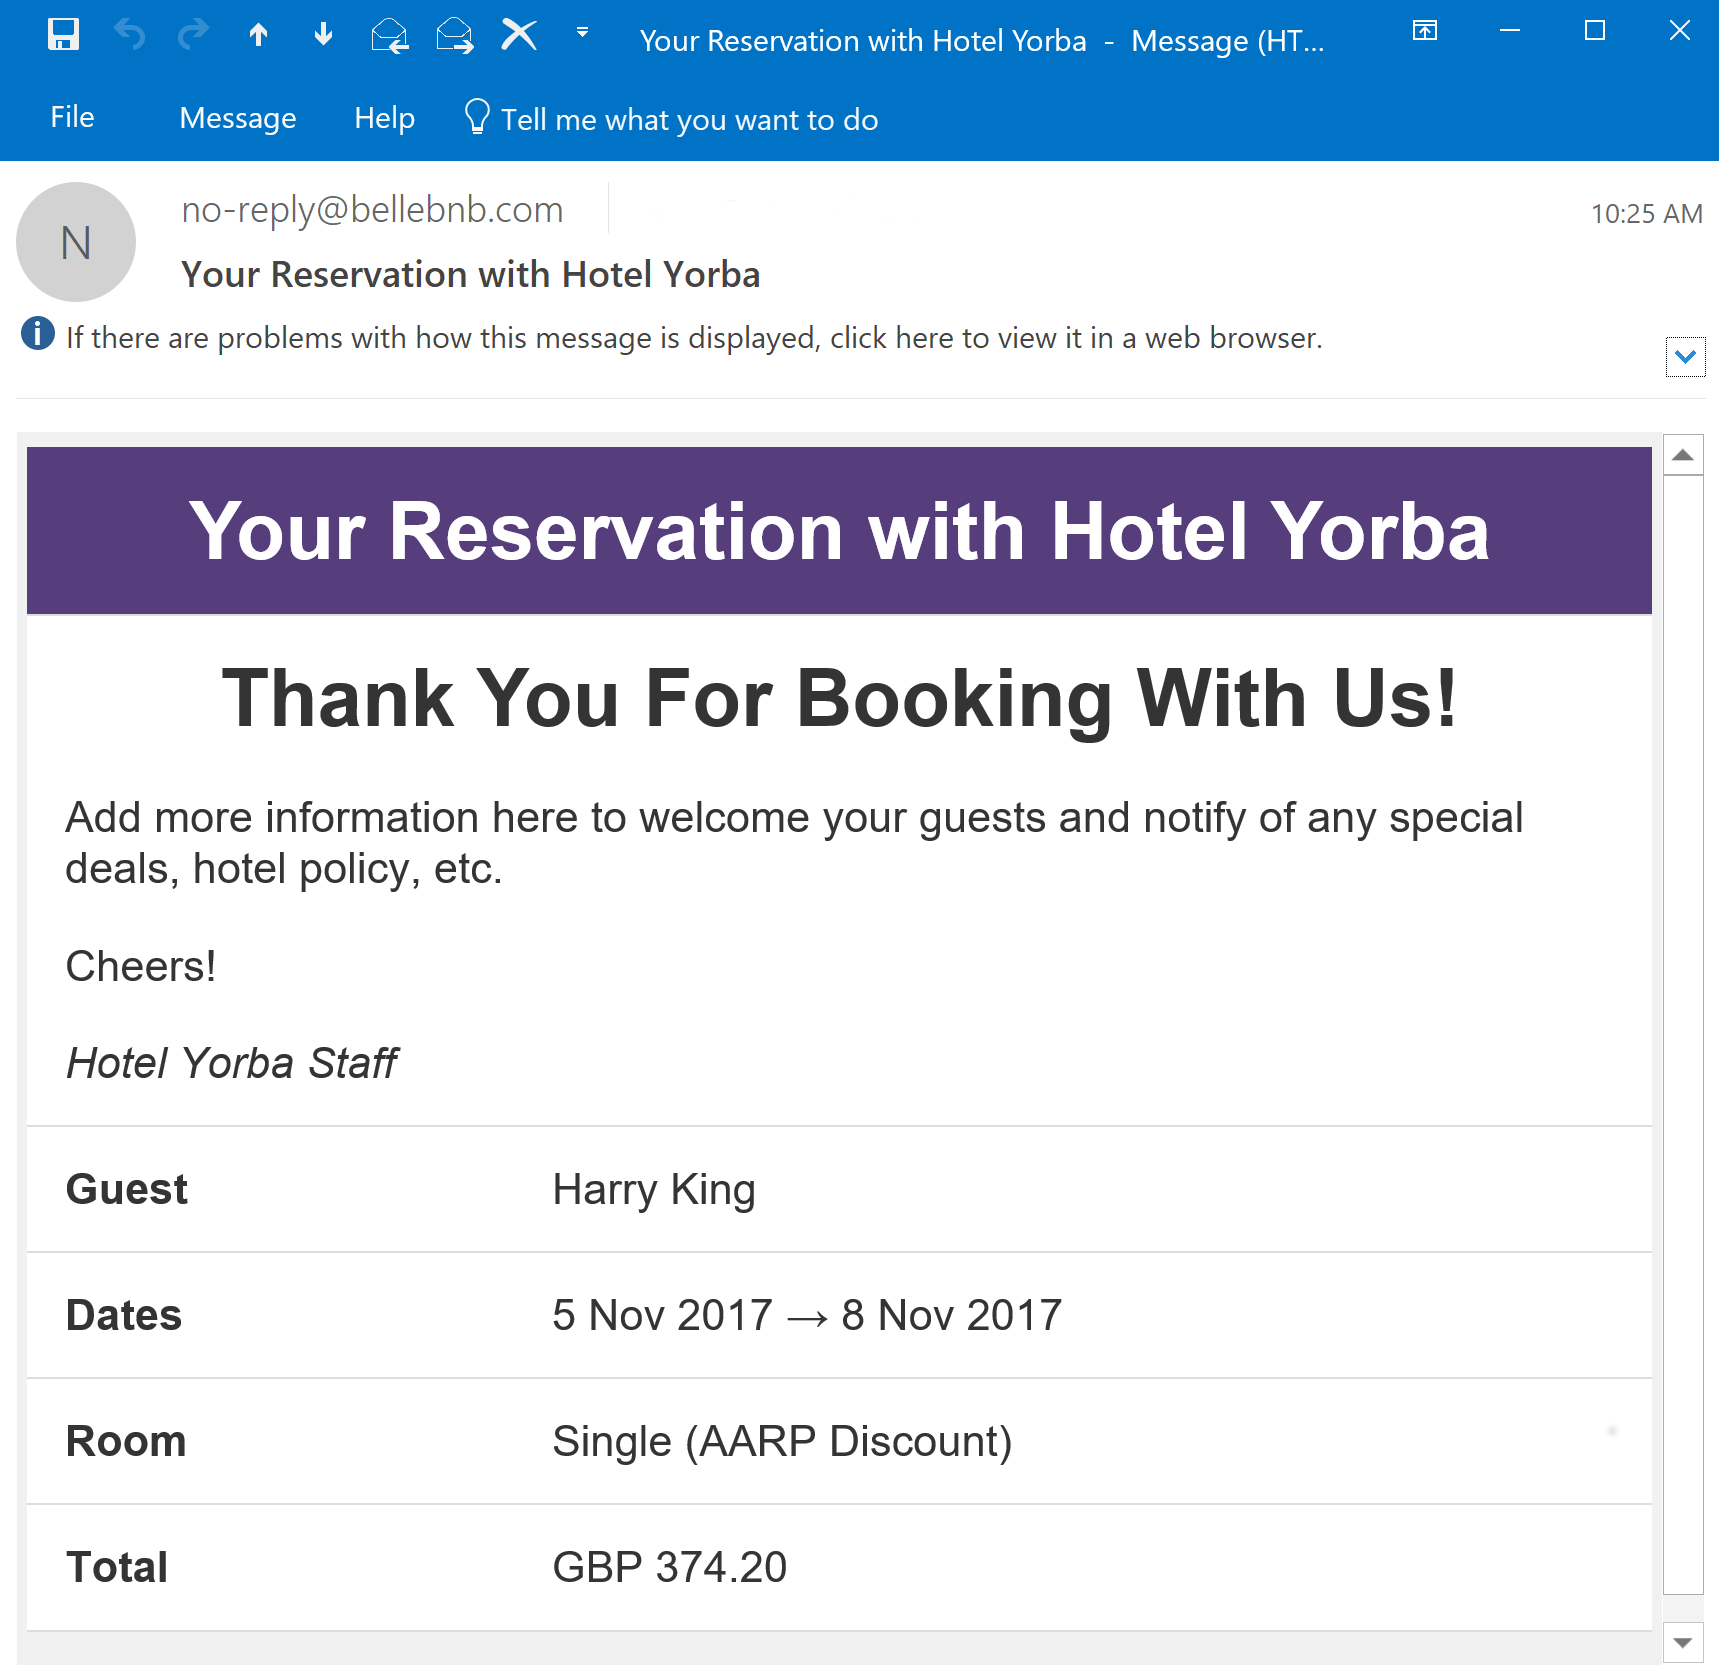 Hotel Management HTML Emails You can now create custom emails for your daily hotel activities. You can create a custom message for new reservations, check-outs, and cancellations. Edit your messages in HTML to send out automatically as part of your bookings flow.